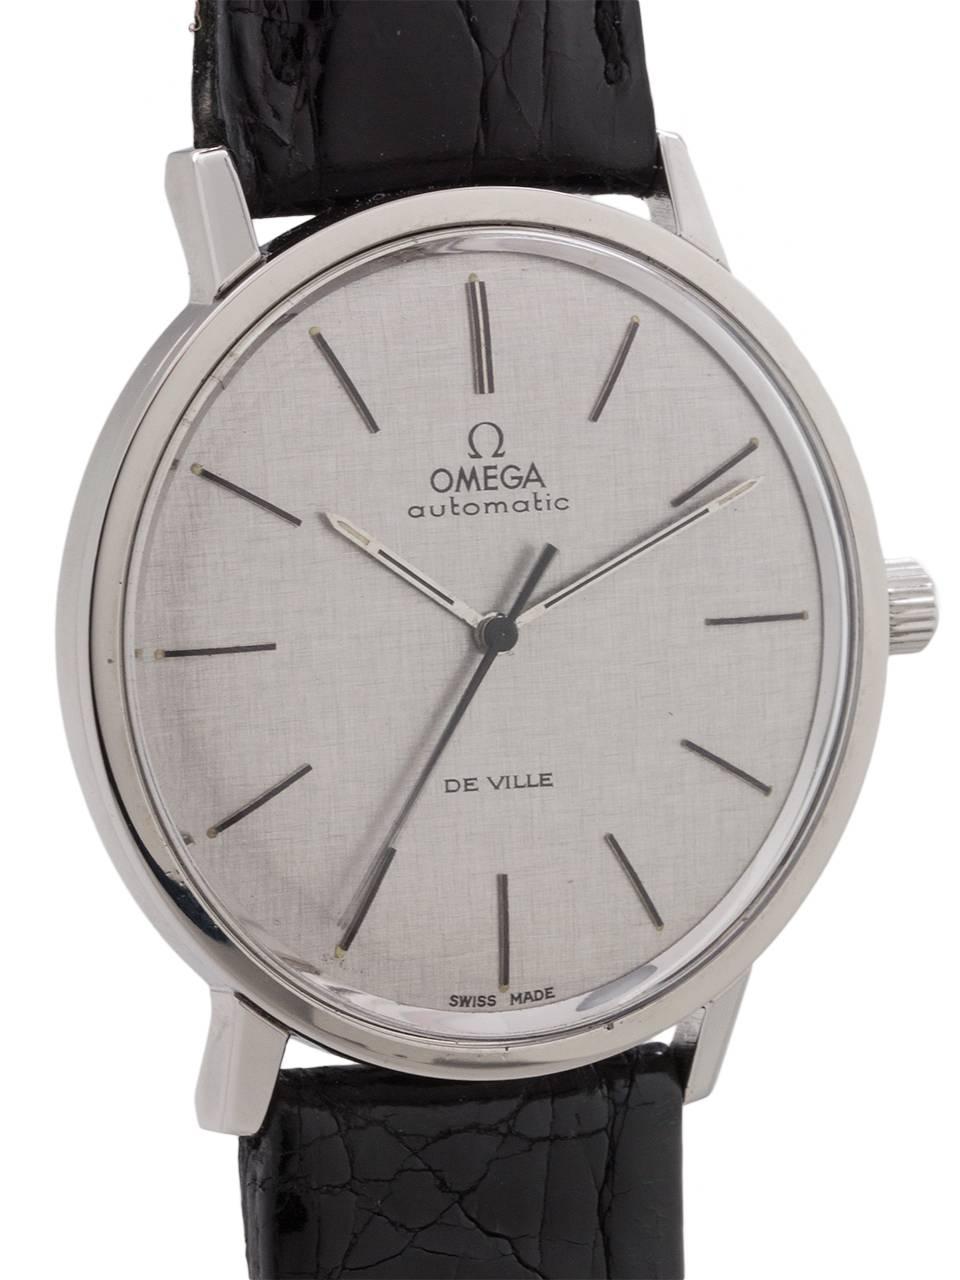 
Very dressy mid century design vintage man’s Omega stainless steel Deville ref # 165.008 circa 1968. Featuring a sleek and slim 35 x 38mm case with screw down case back, acrylic crystal, and original finely linen textured matte silvered dial with